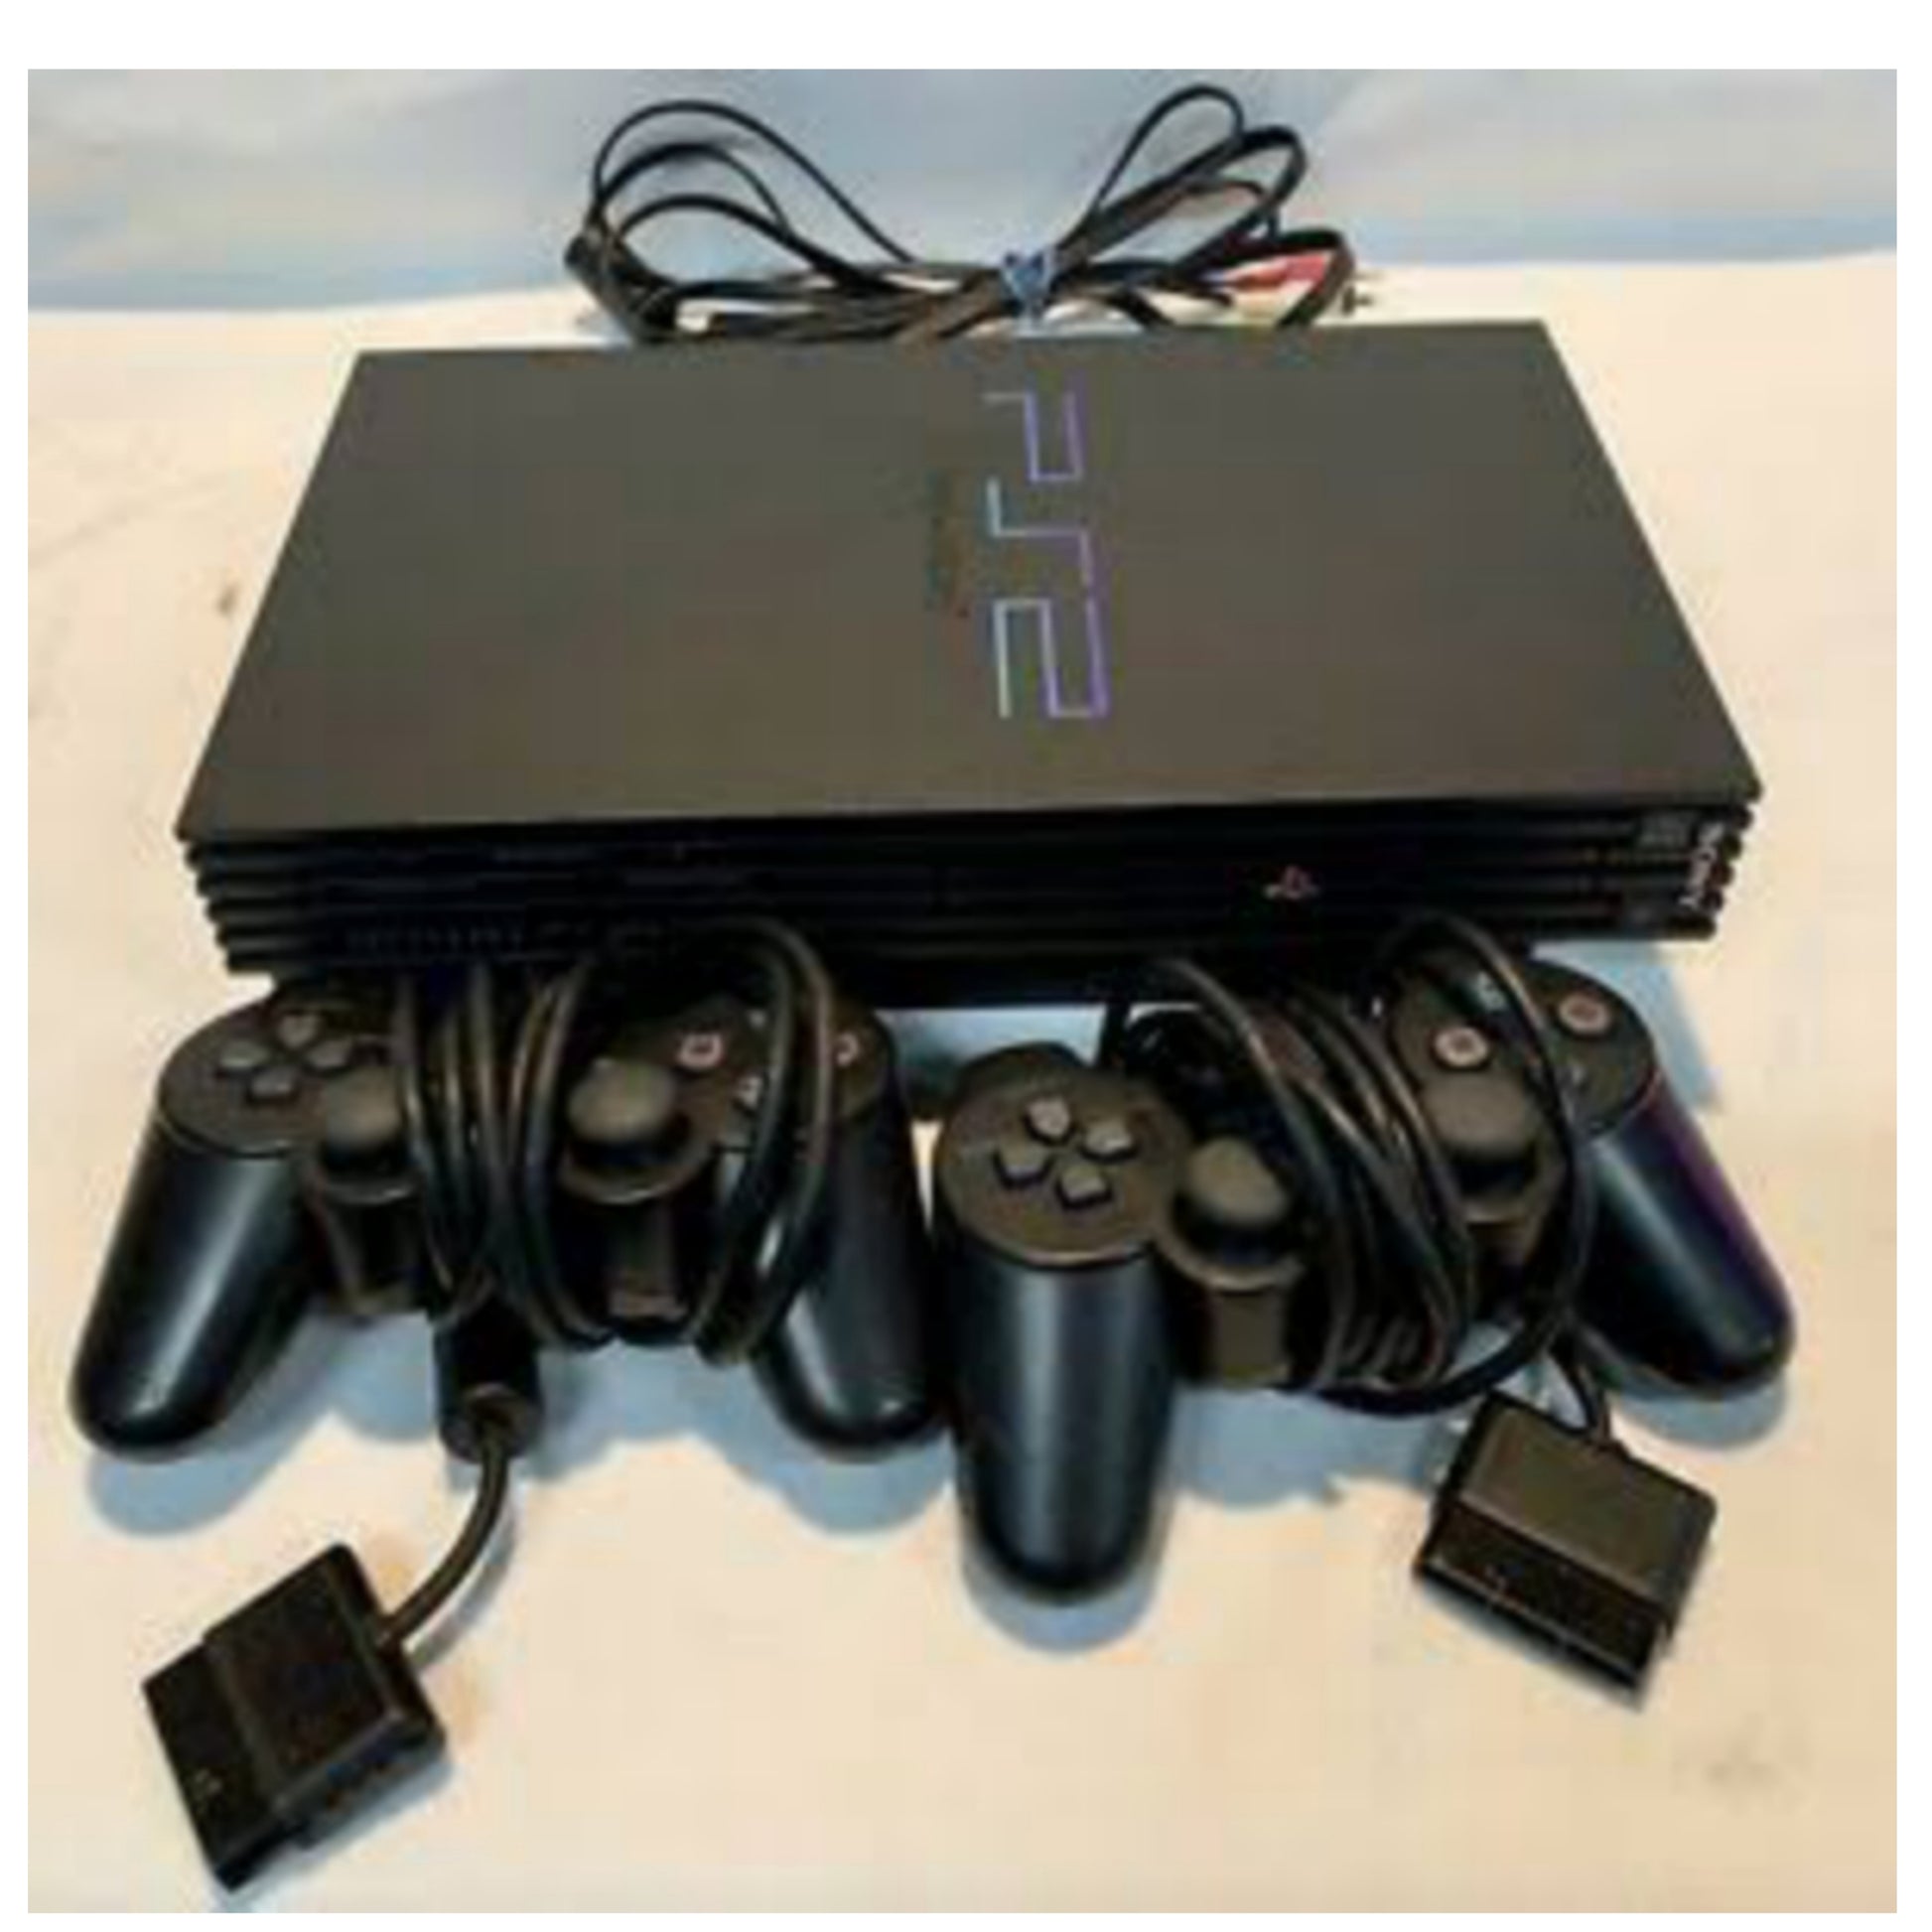 Sony Playstation 2 (PS2) Game Console Complete Set with 1 DUALSHOCK Wi –  IFESOLOX